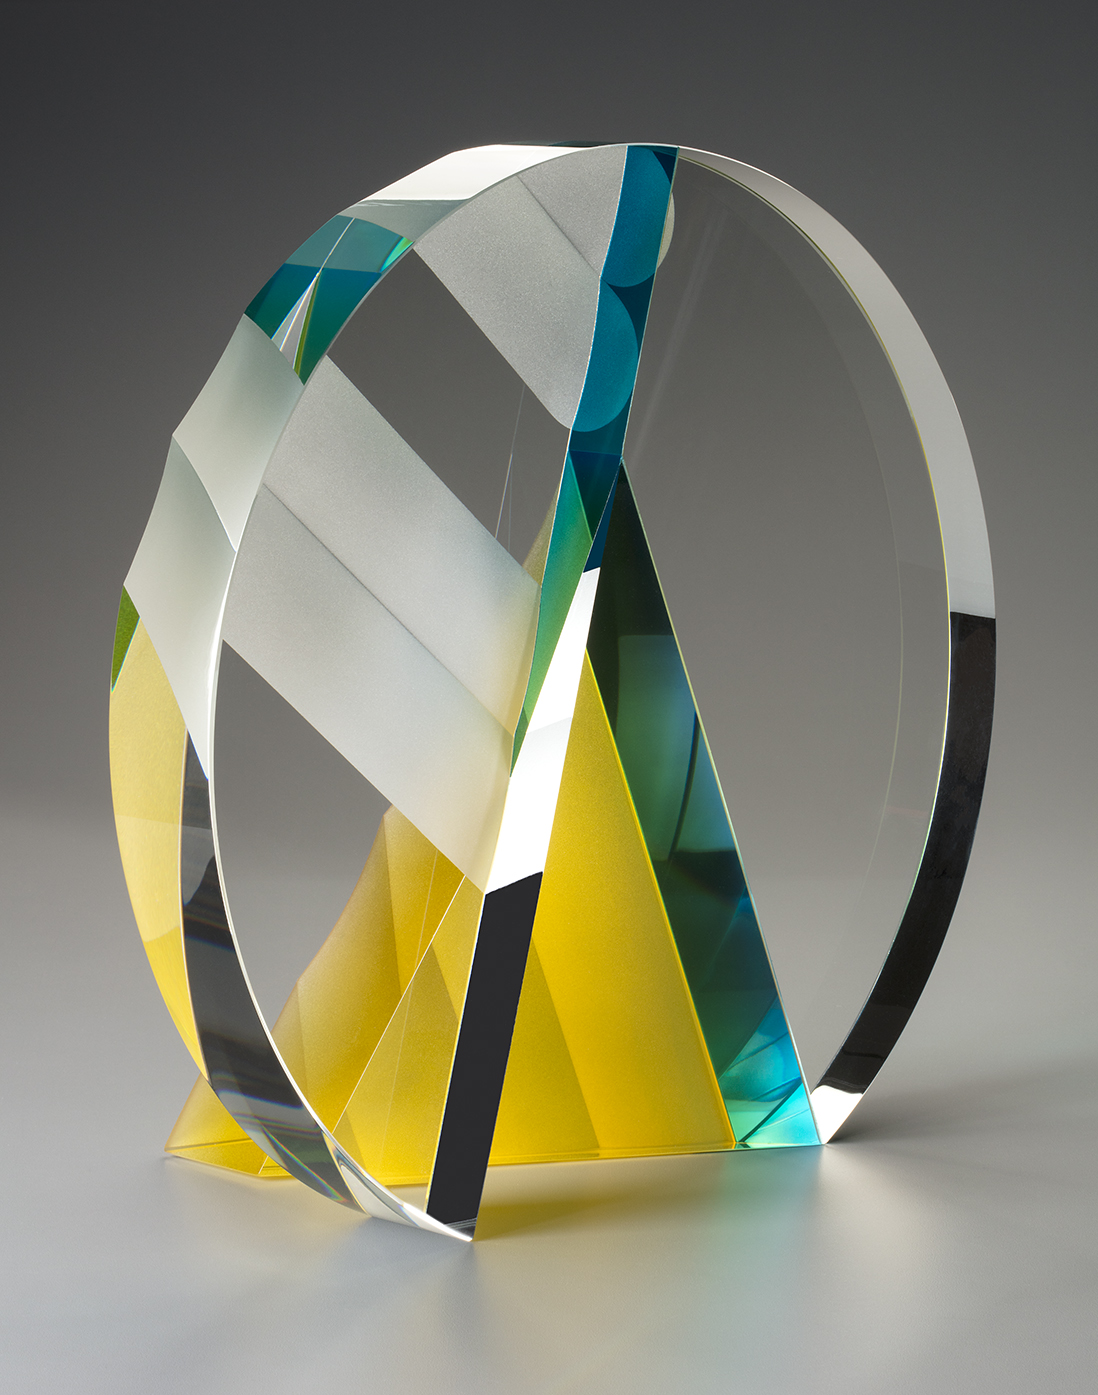 Mesmerizing abstract glass sculptures by Martin Rosol